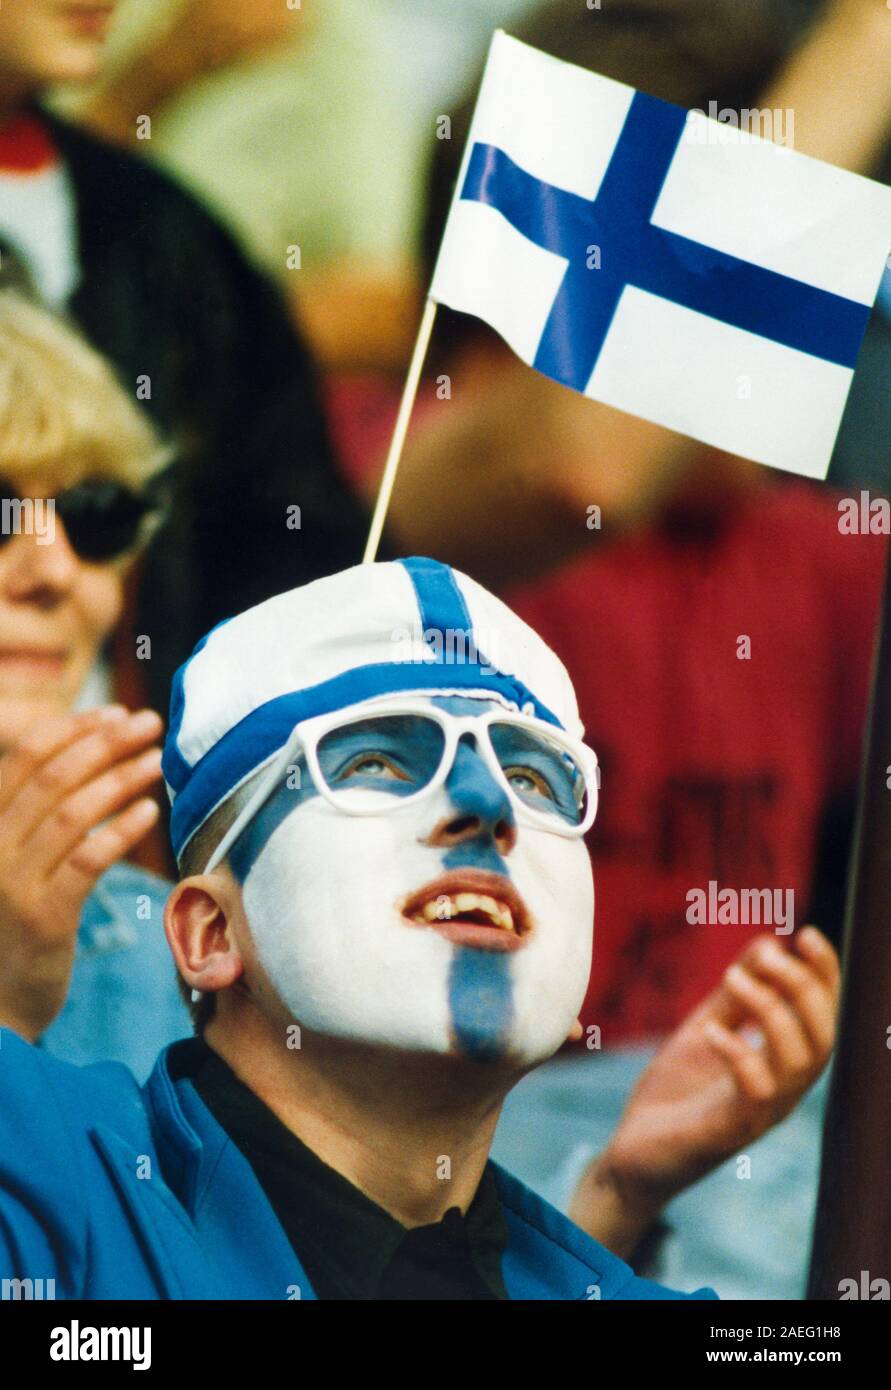 ATHLETICS SUPPORTER during Nationals betwenn Sweden and Finland in athletics Stock Photo